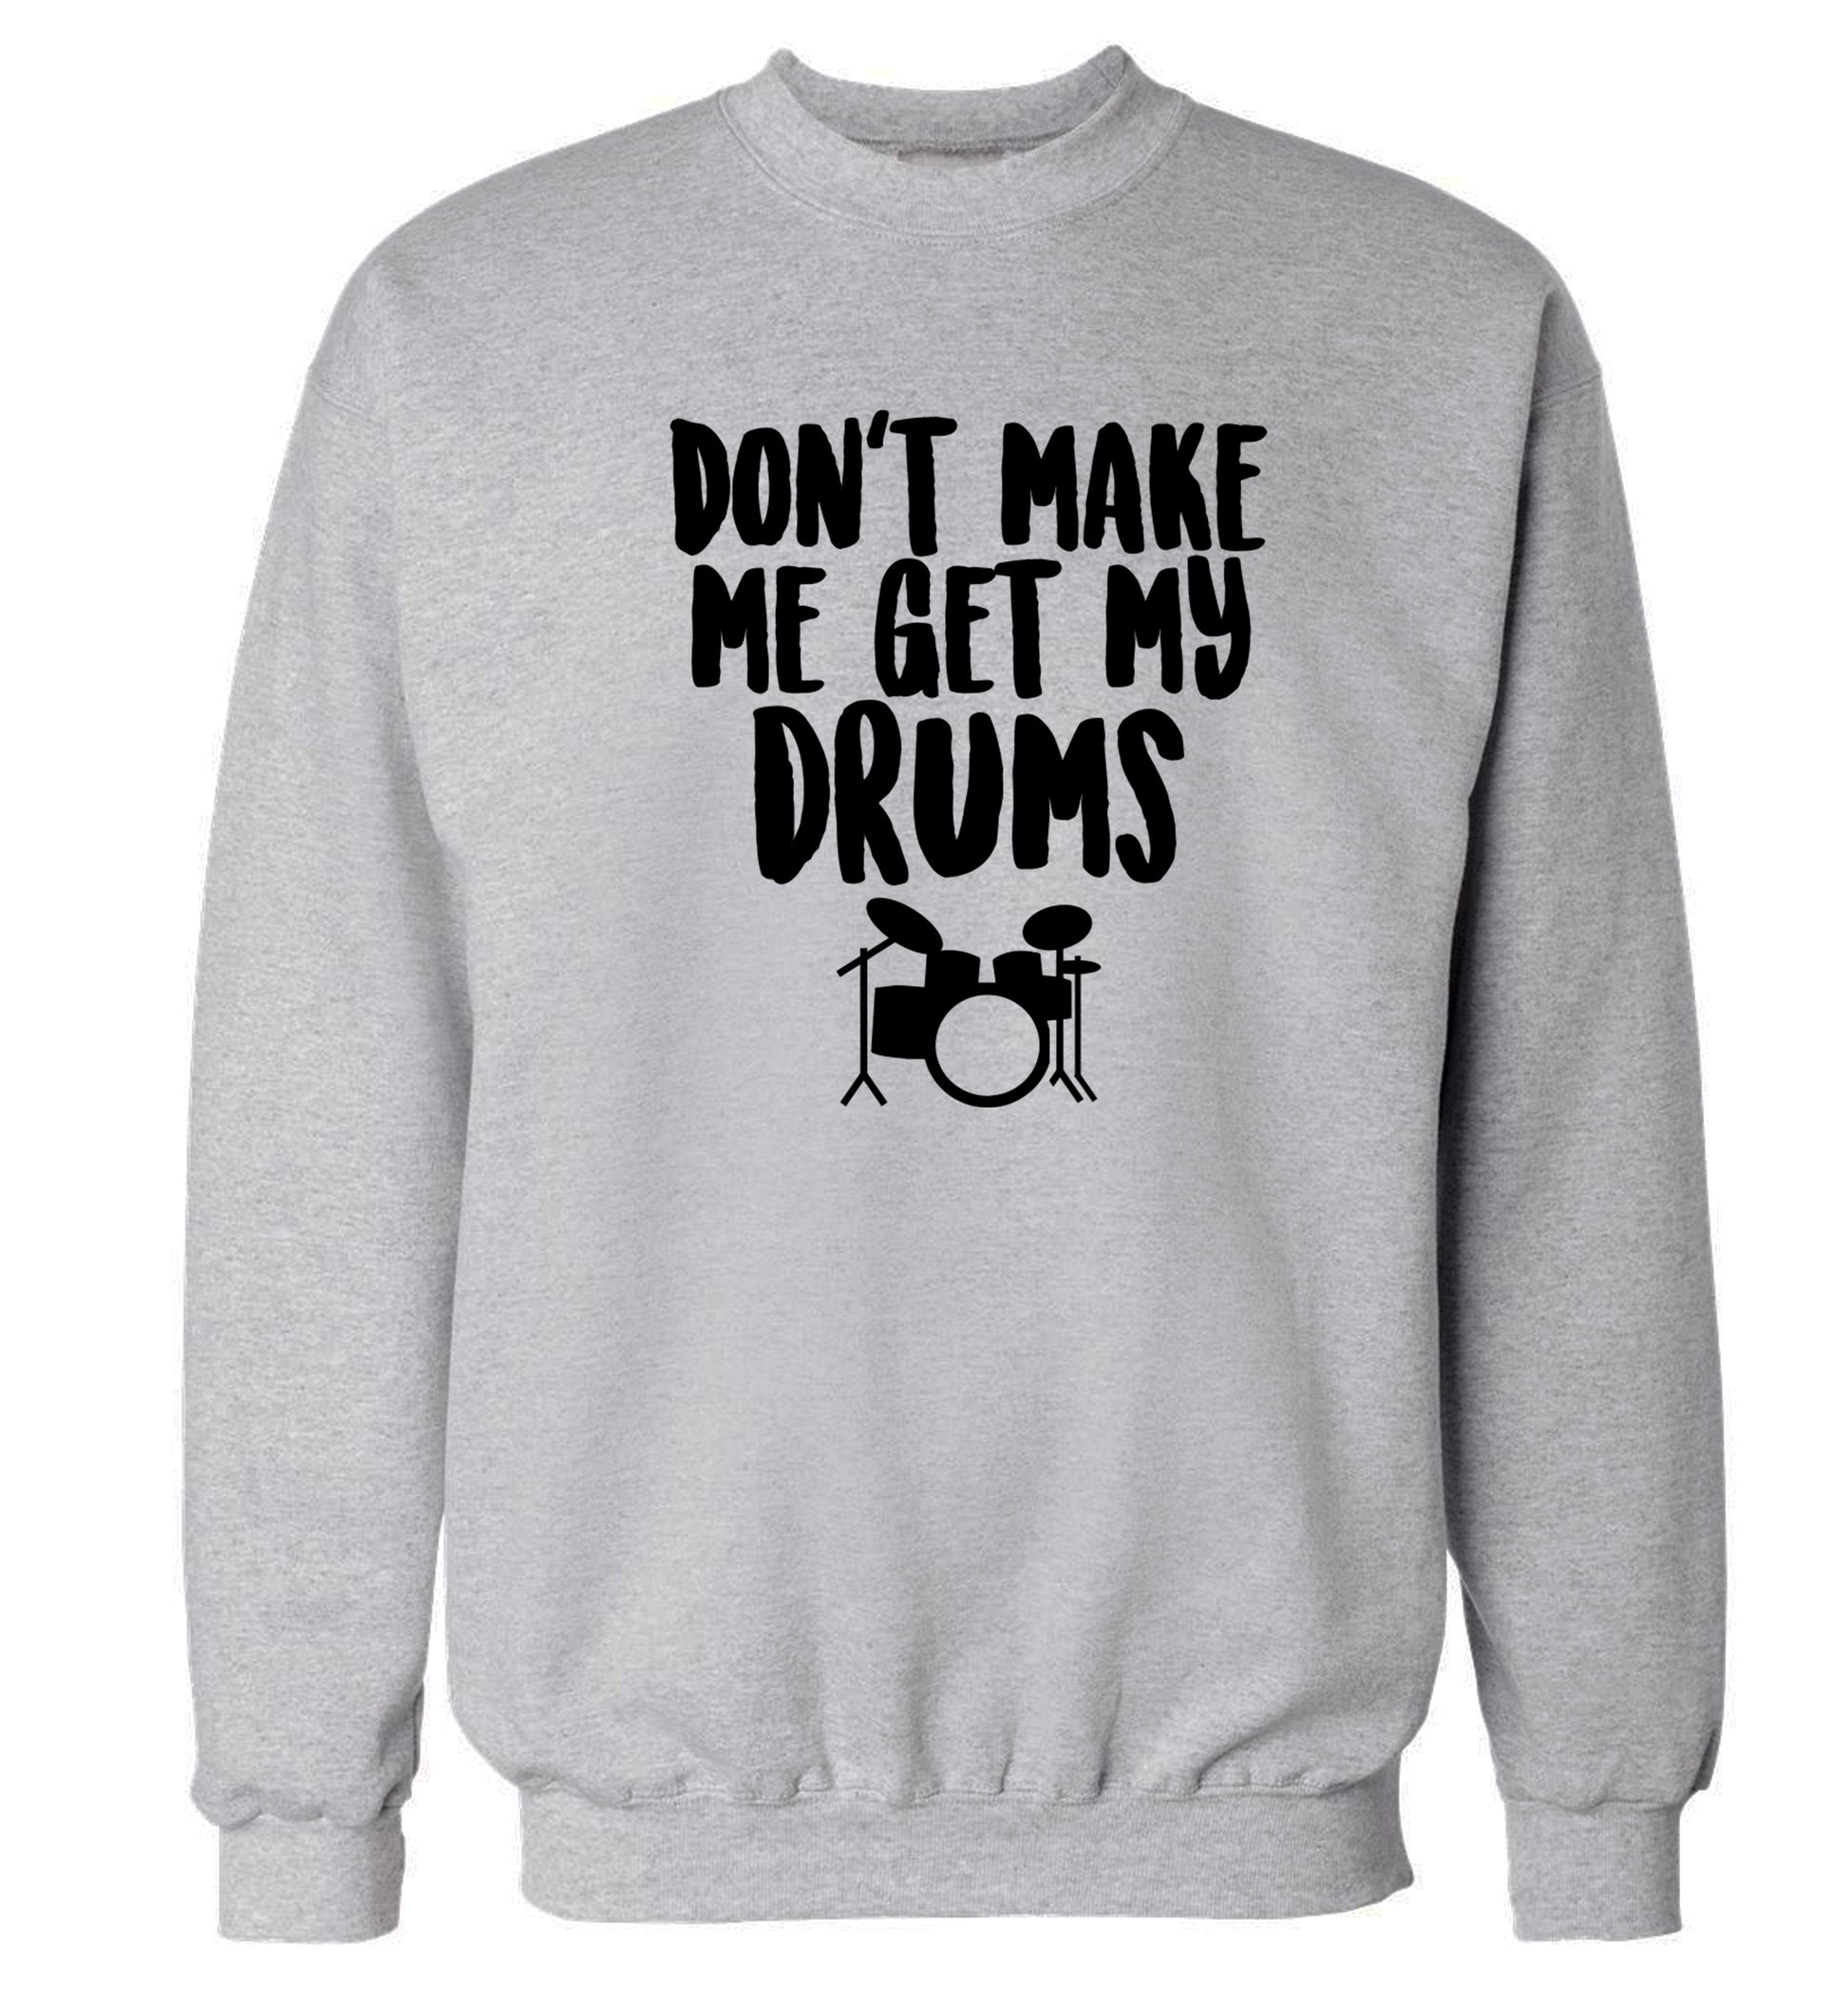 Don't make me get my drums Adult's unisex grey Sweater 2XL